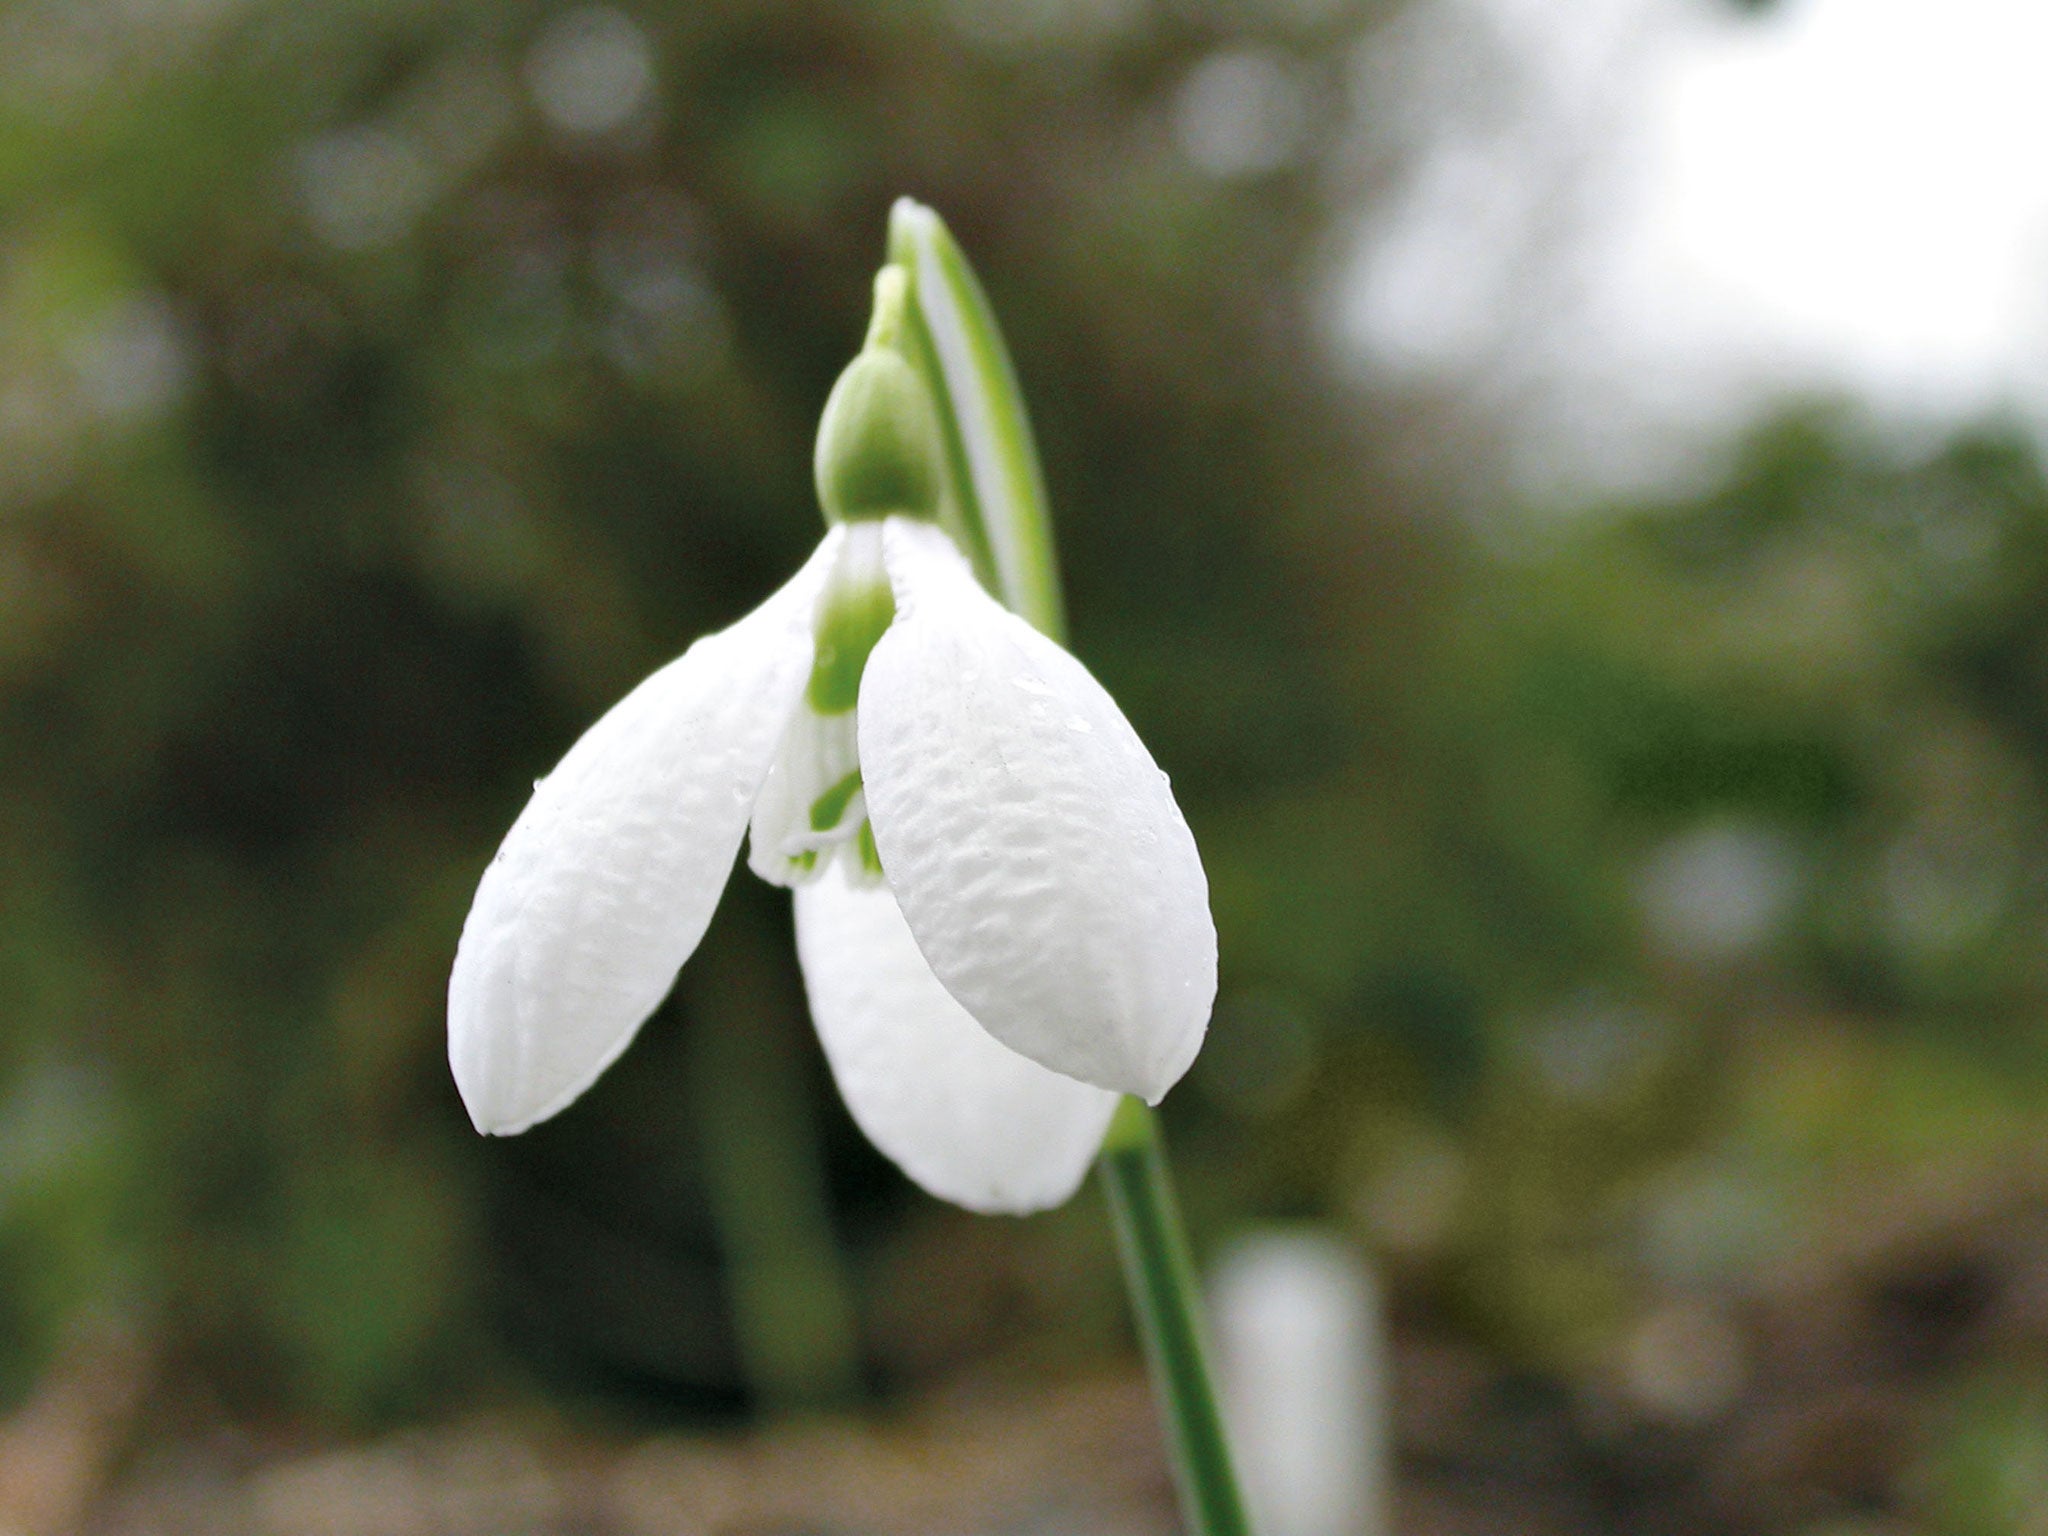 The early-flowering celadon snowdrop, from Snowdrops